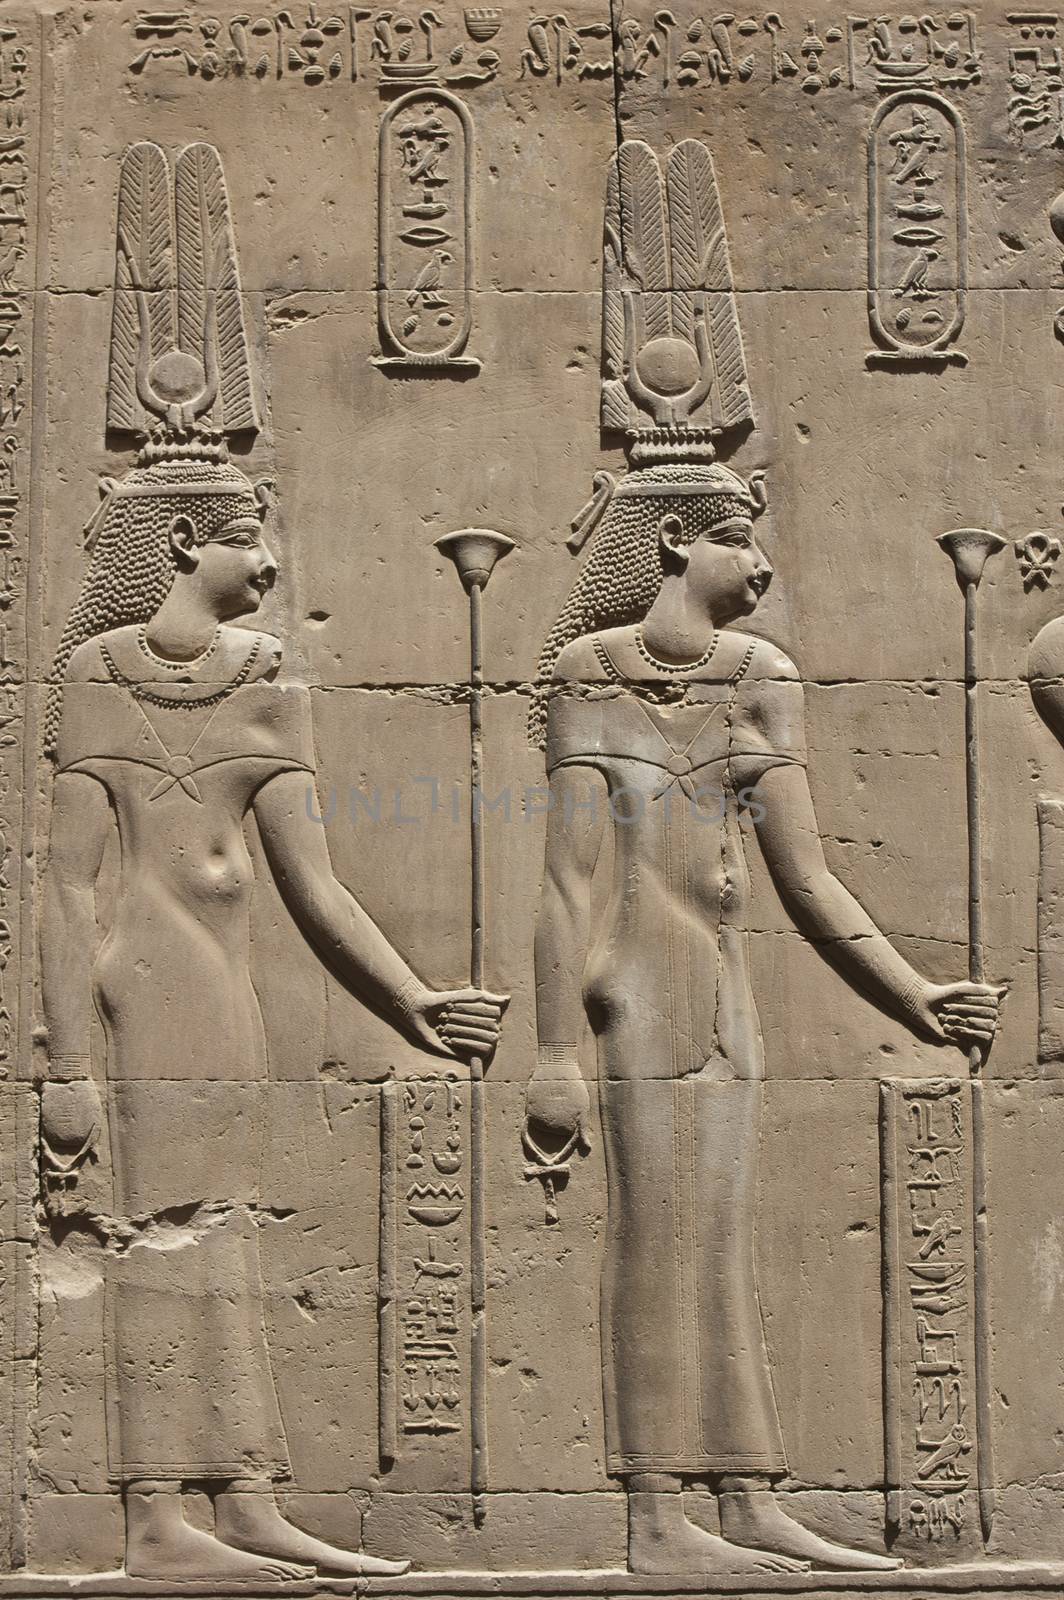 Hieroglyphic carvings on an Egyptian temple wall by paulvinten